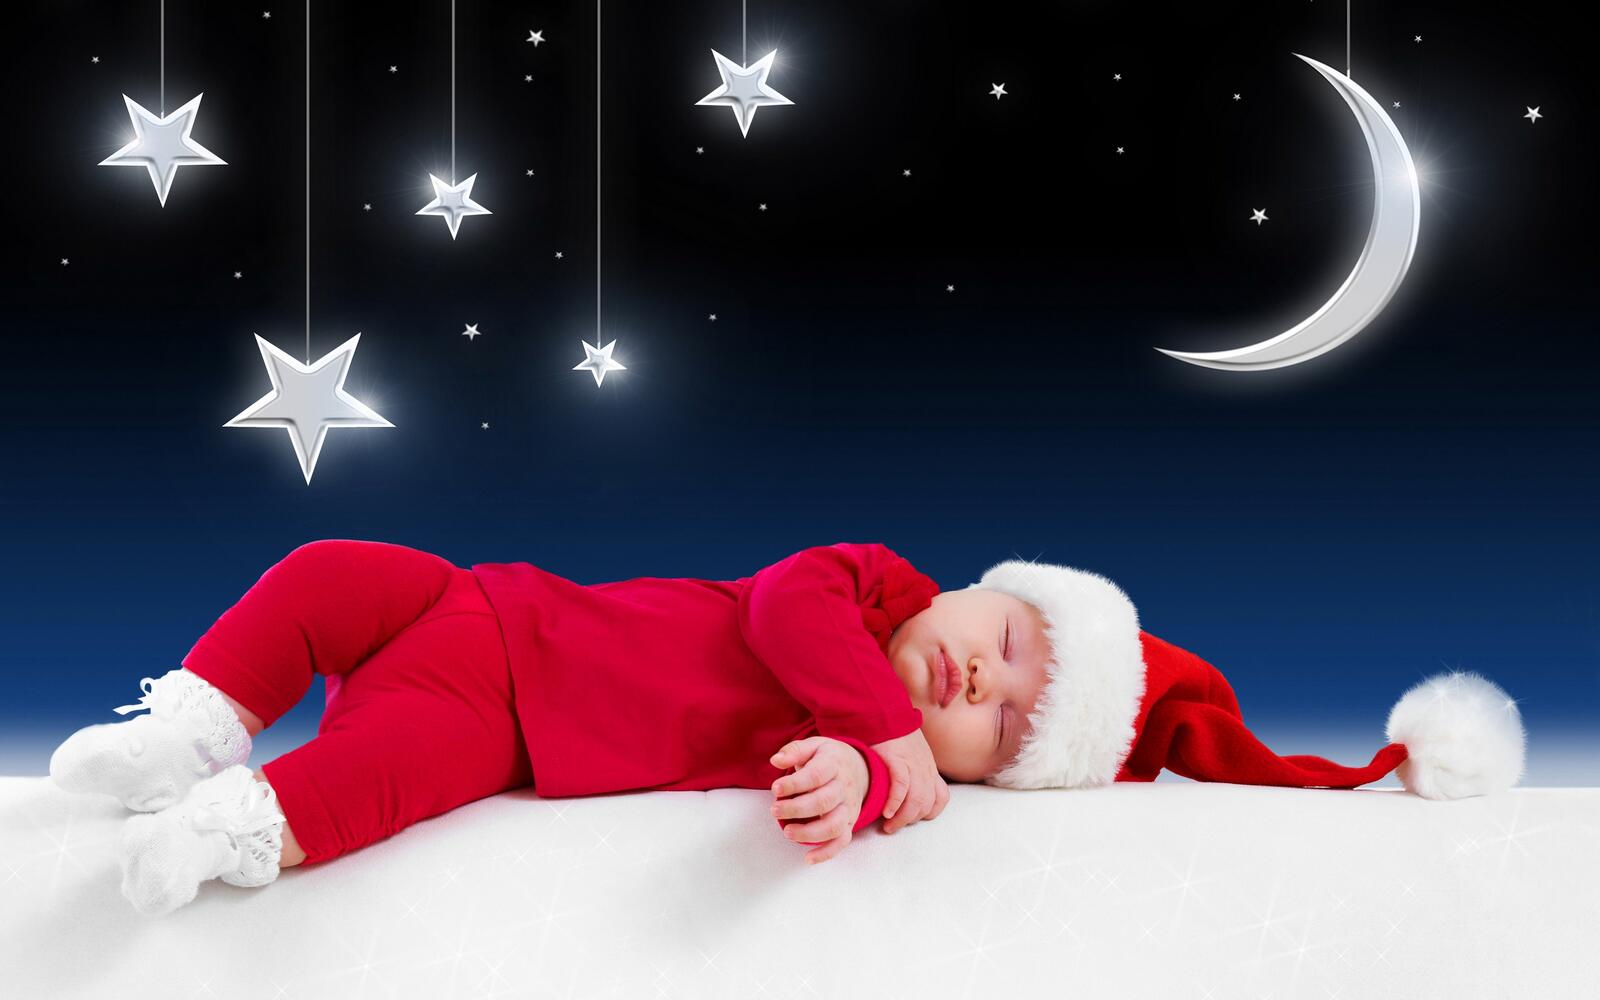 Wallpapers baby sleeping new year on the desktop